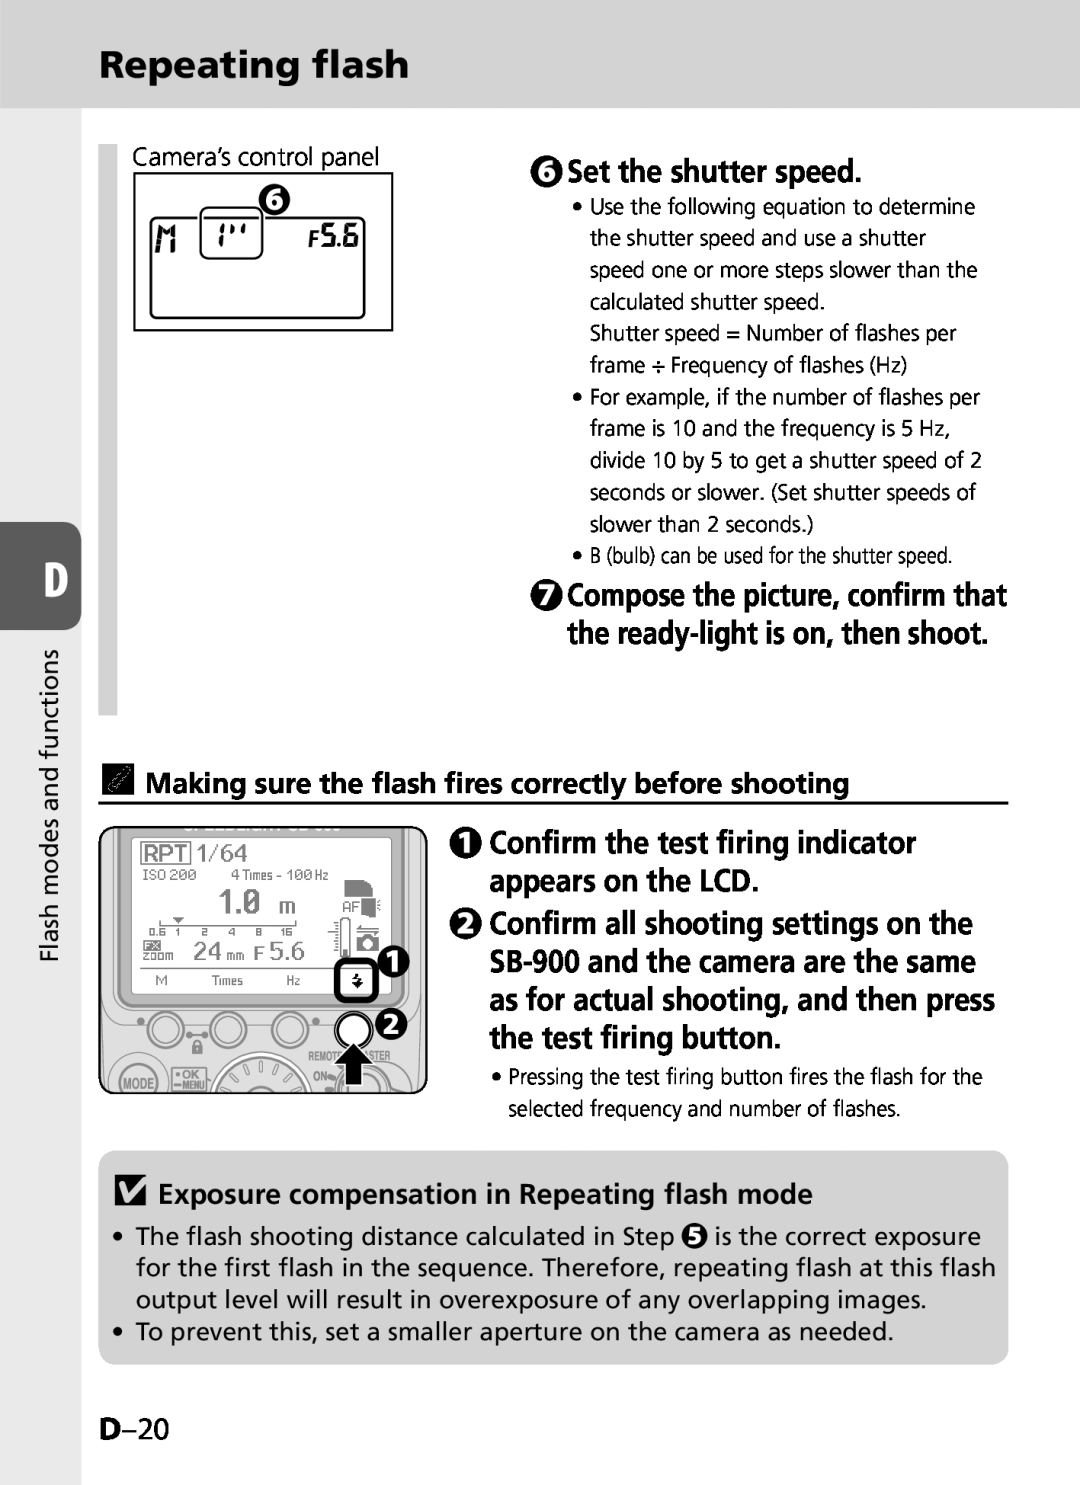 Univex SB-900 user manual Set the shutter speed, D–20, vExposure compensation in Repeating ﬂash mode, Repeating flash 